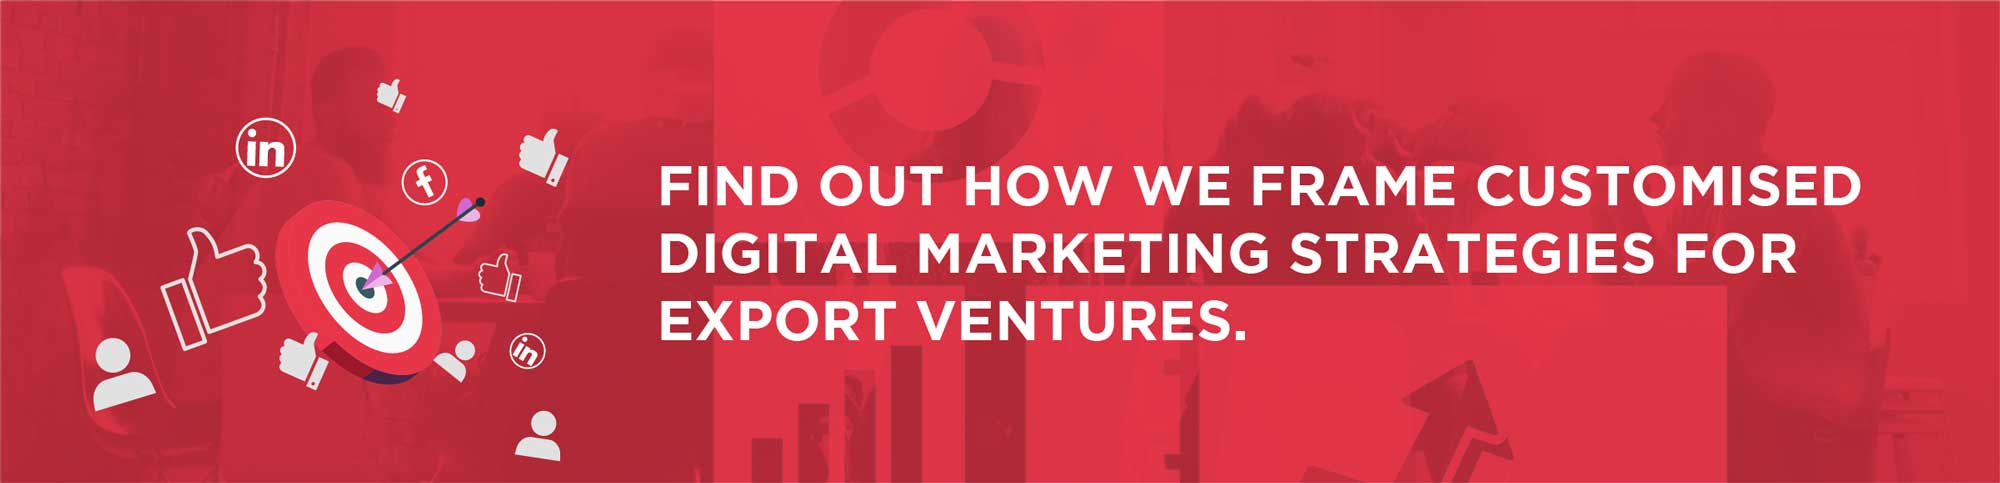 Customized Digital Marketing Strategy for Export Ventures